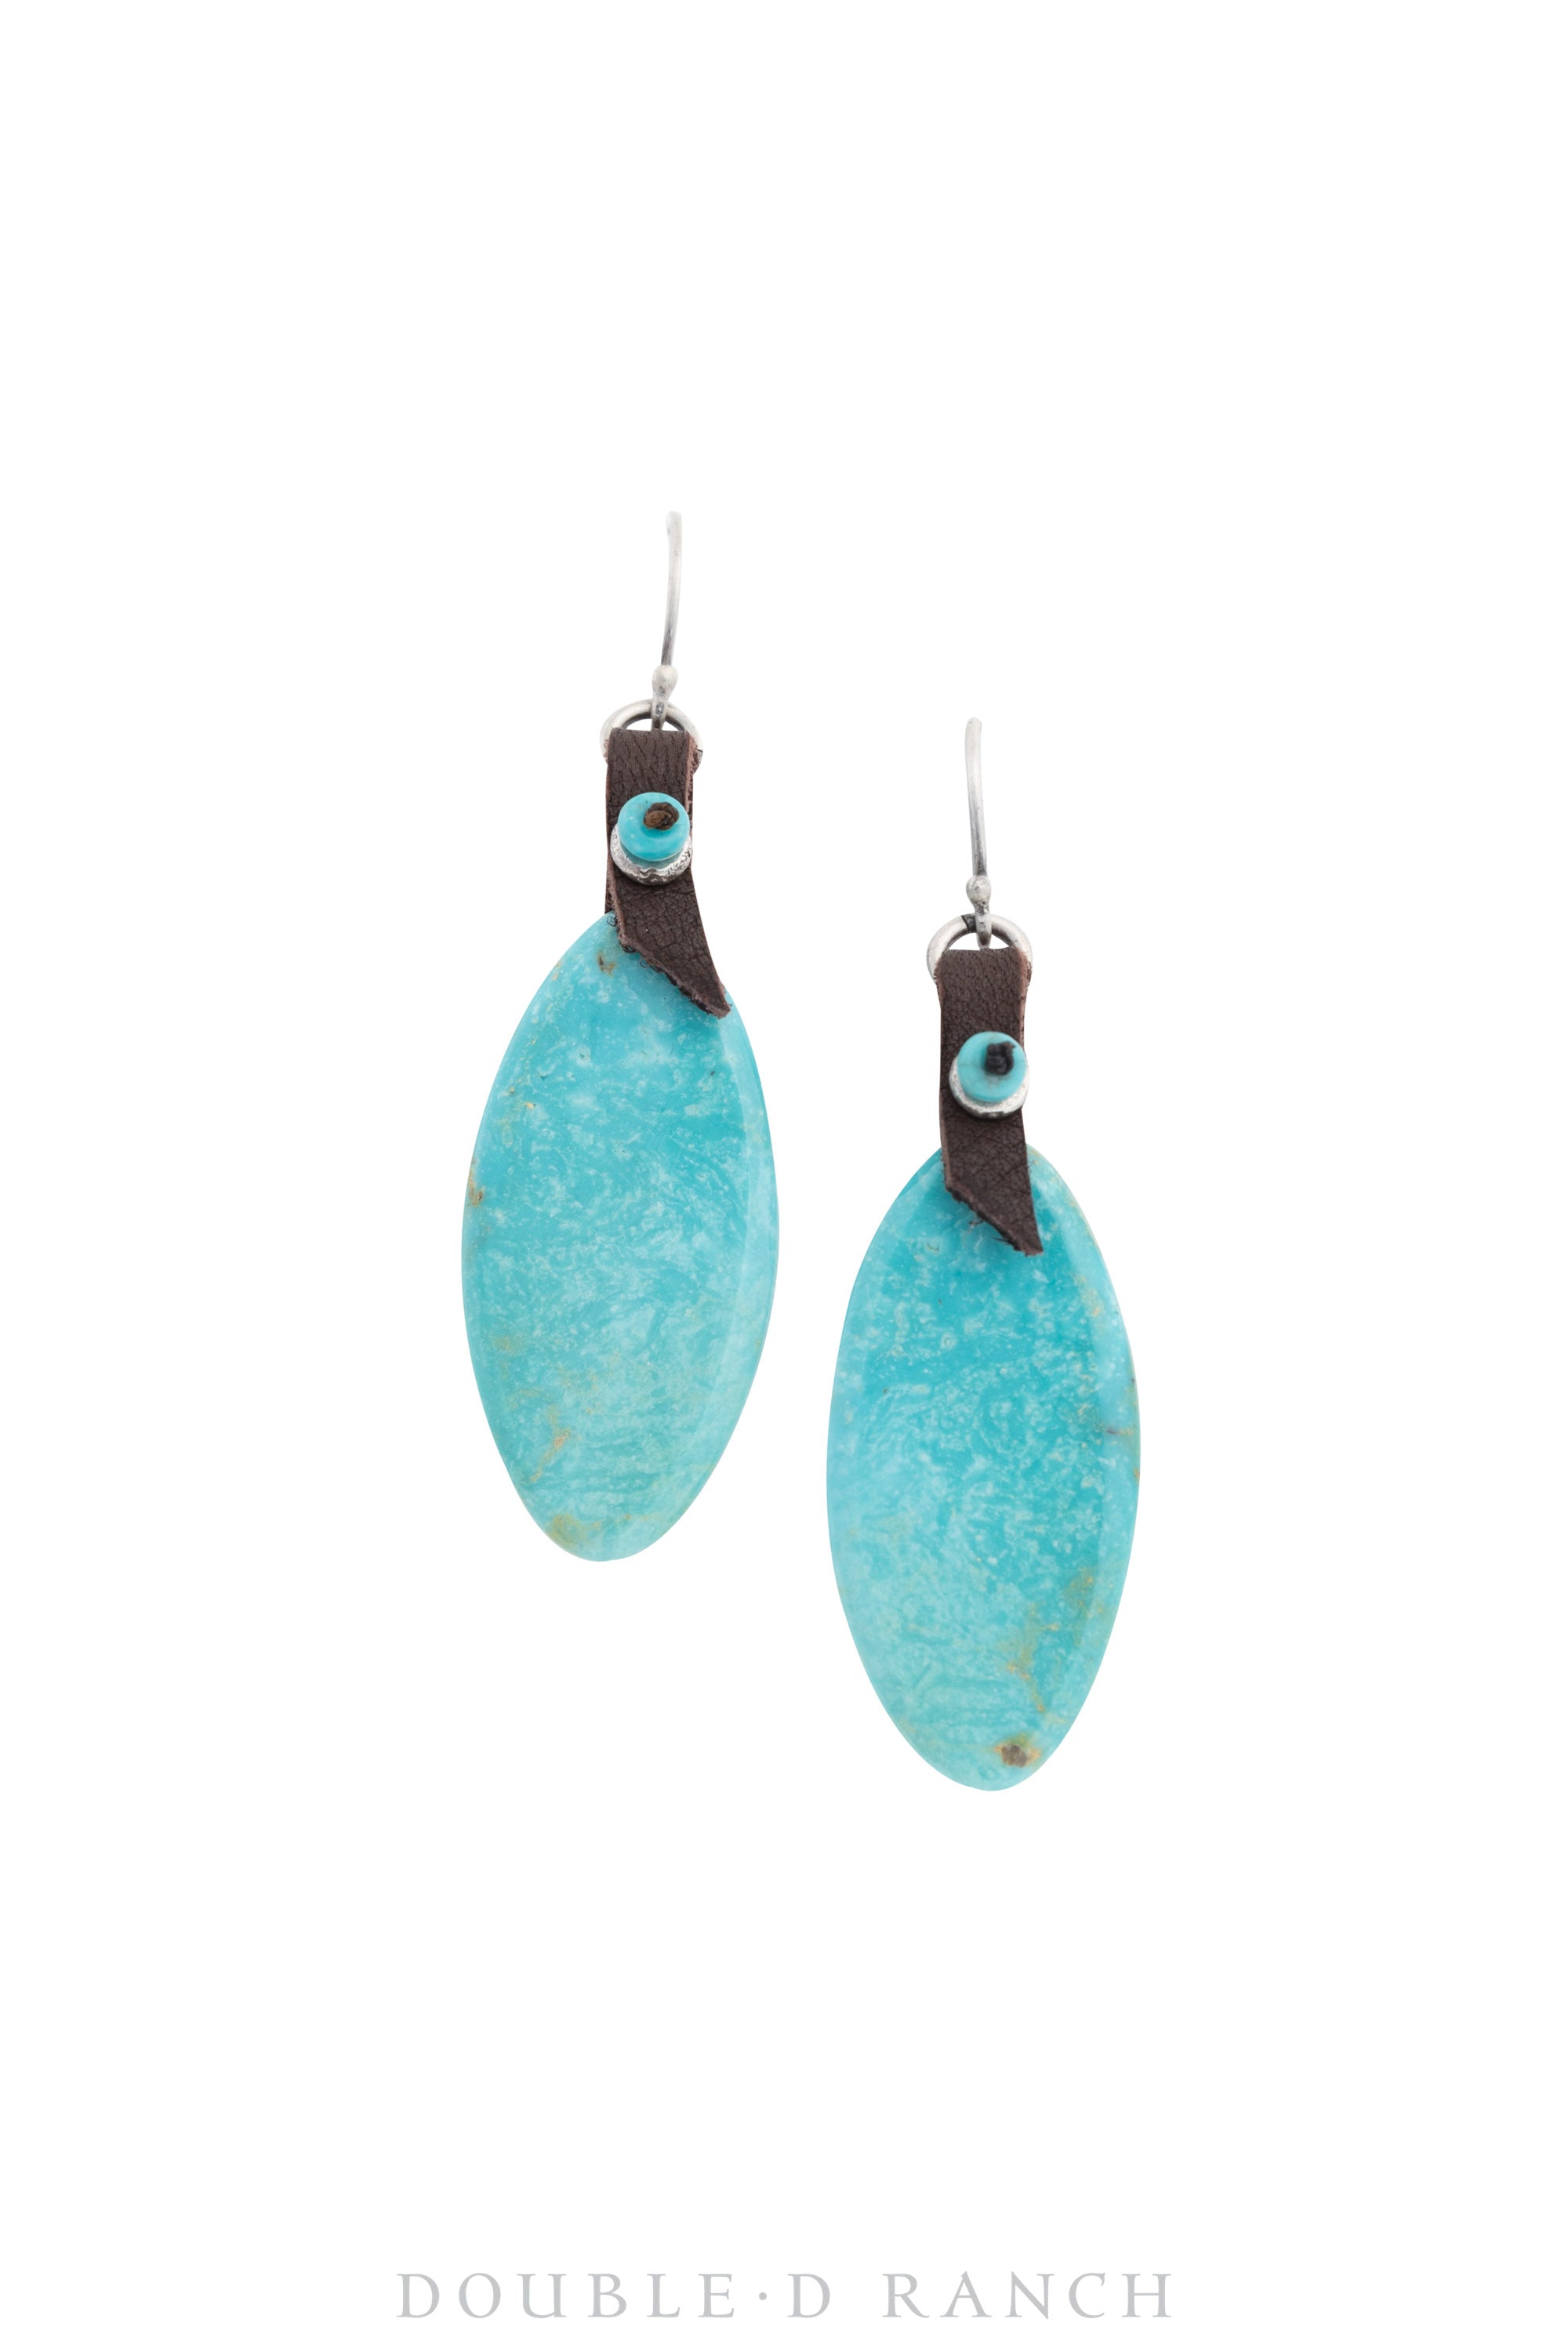 Earrings, Slab, Turquoise, Contemporary, 1479